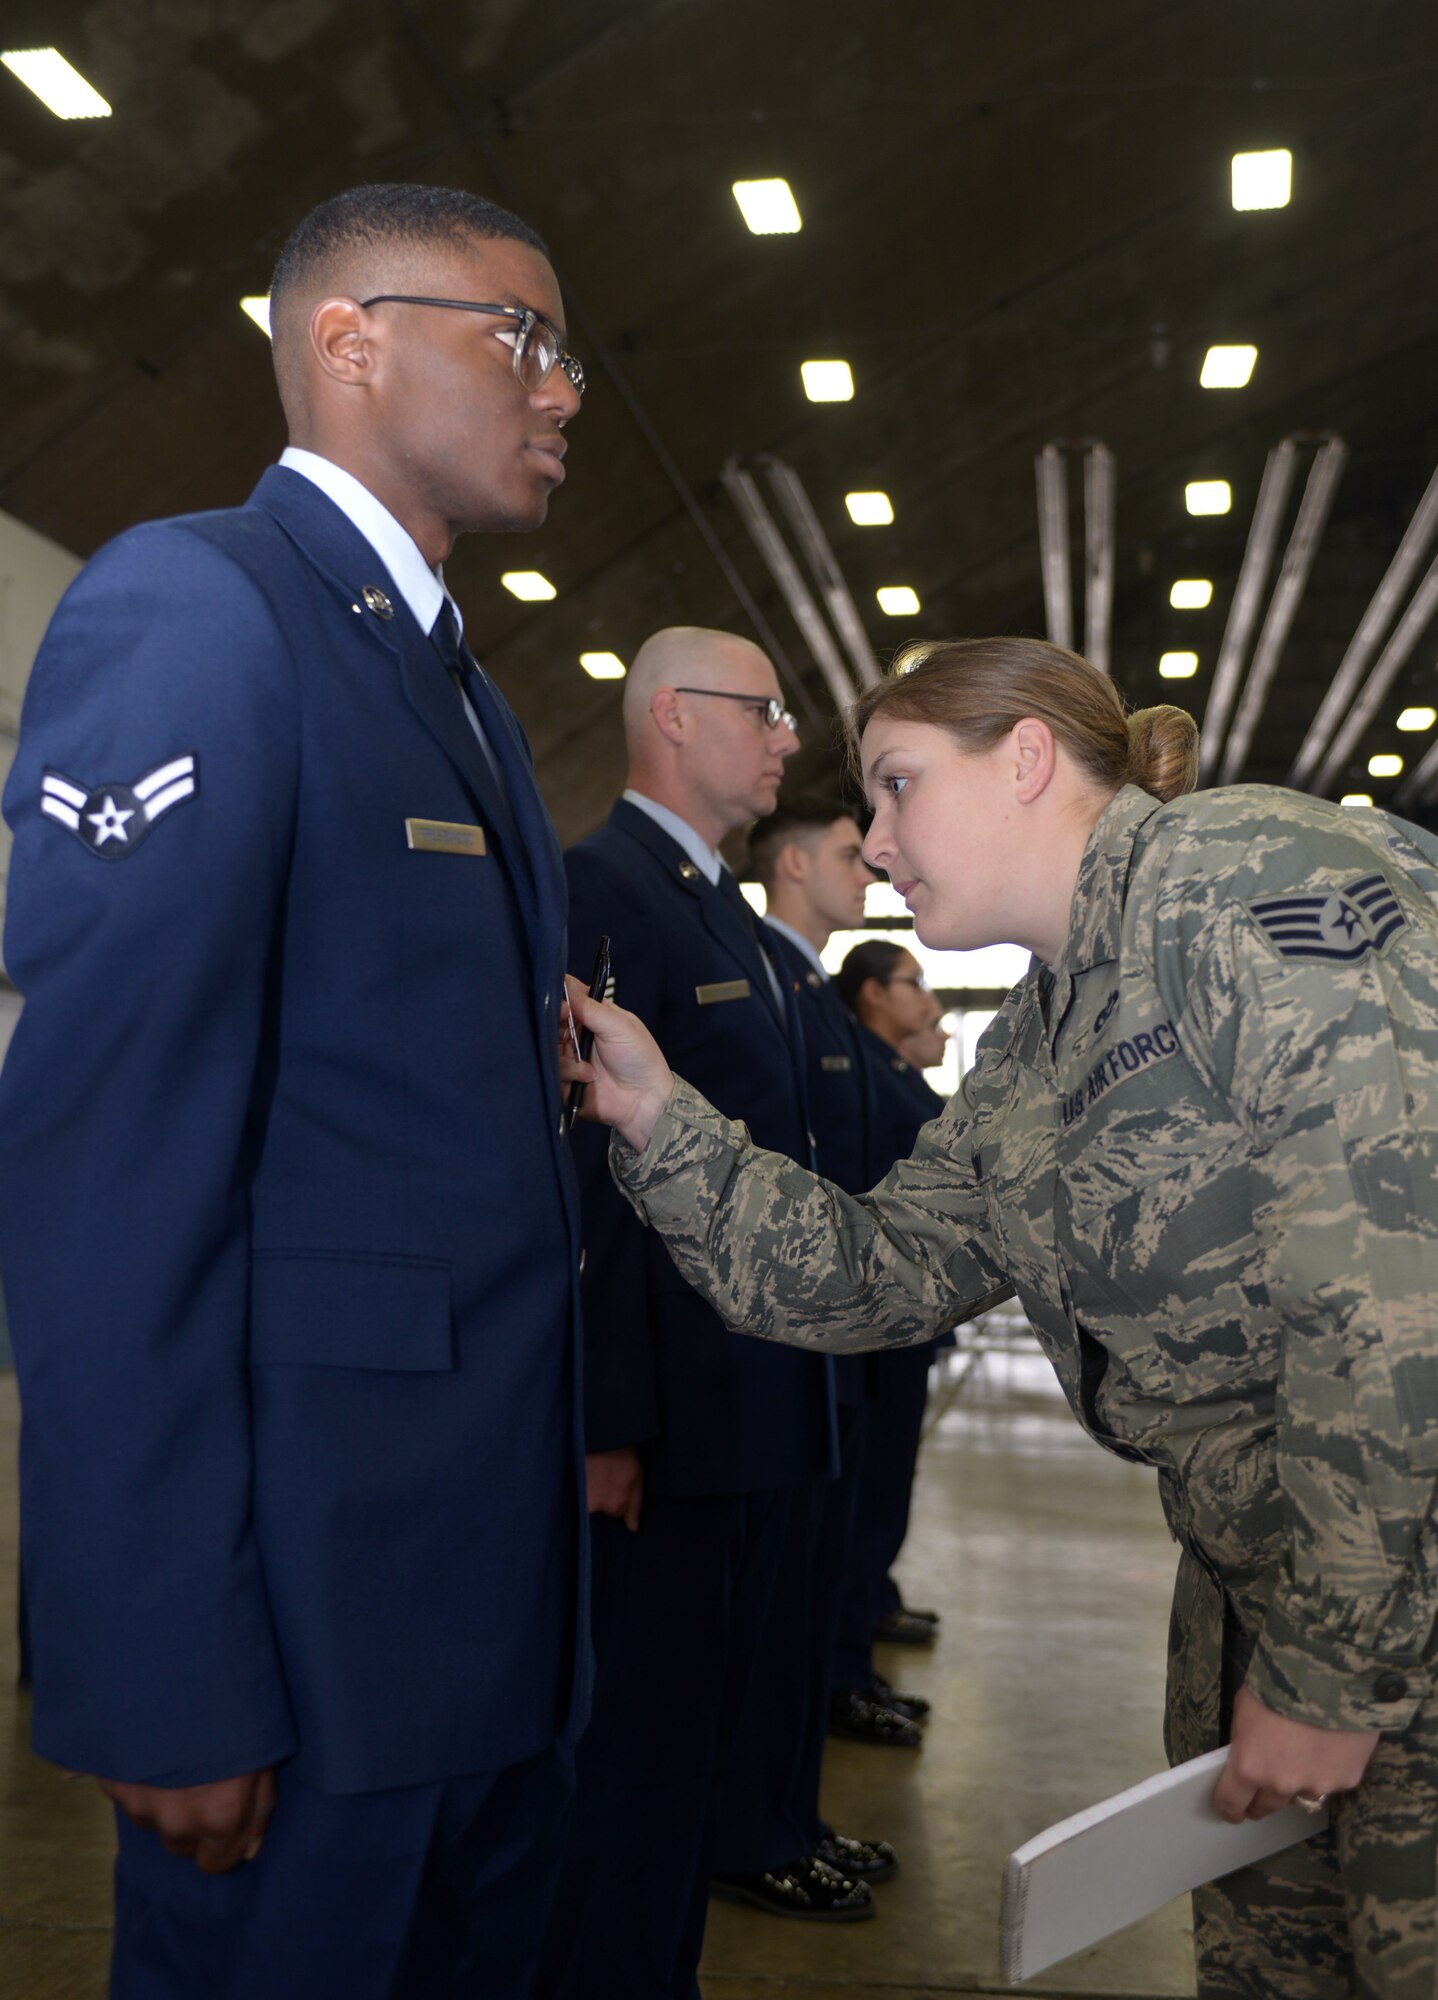 Staff Sgt. Michelle Hoyal, an honor guard flight sergeant assigned to the 28th Force Support Squadron, inspects Airman 1st Class Roger Presswoods’ uniform during open ranks in the Pride hangar at Ellsworth Air Force Base, S.D., Dec. 2, 2016. The Ellsworth Honor Guard is responsible for providing military honors throughout a 114,636 square-mile area including South Dakota, western Nebraska and northern Wyoming. (U.S. Air Force photo by Airman 1st Class Donald C. Knechtel)